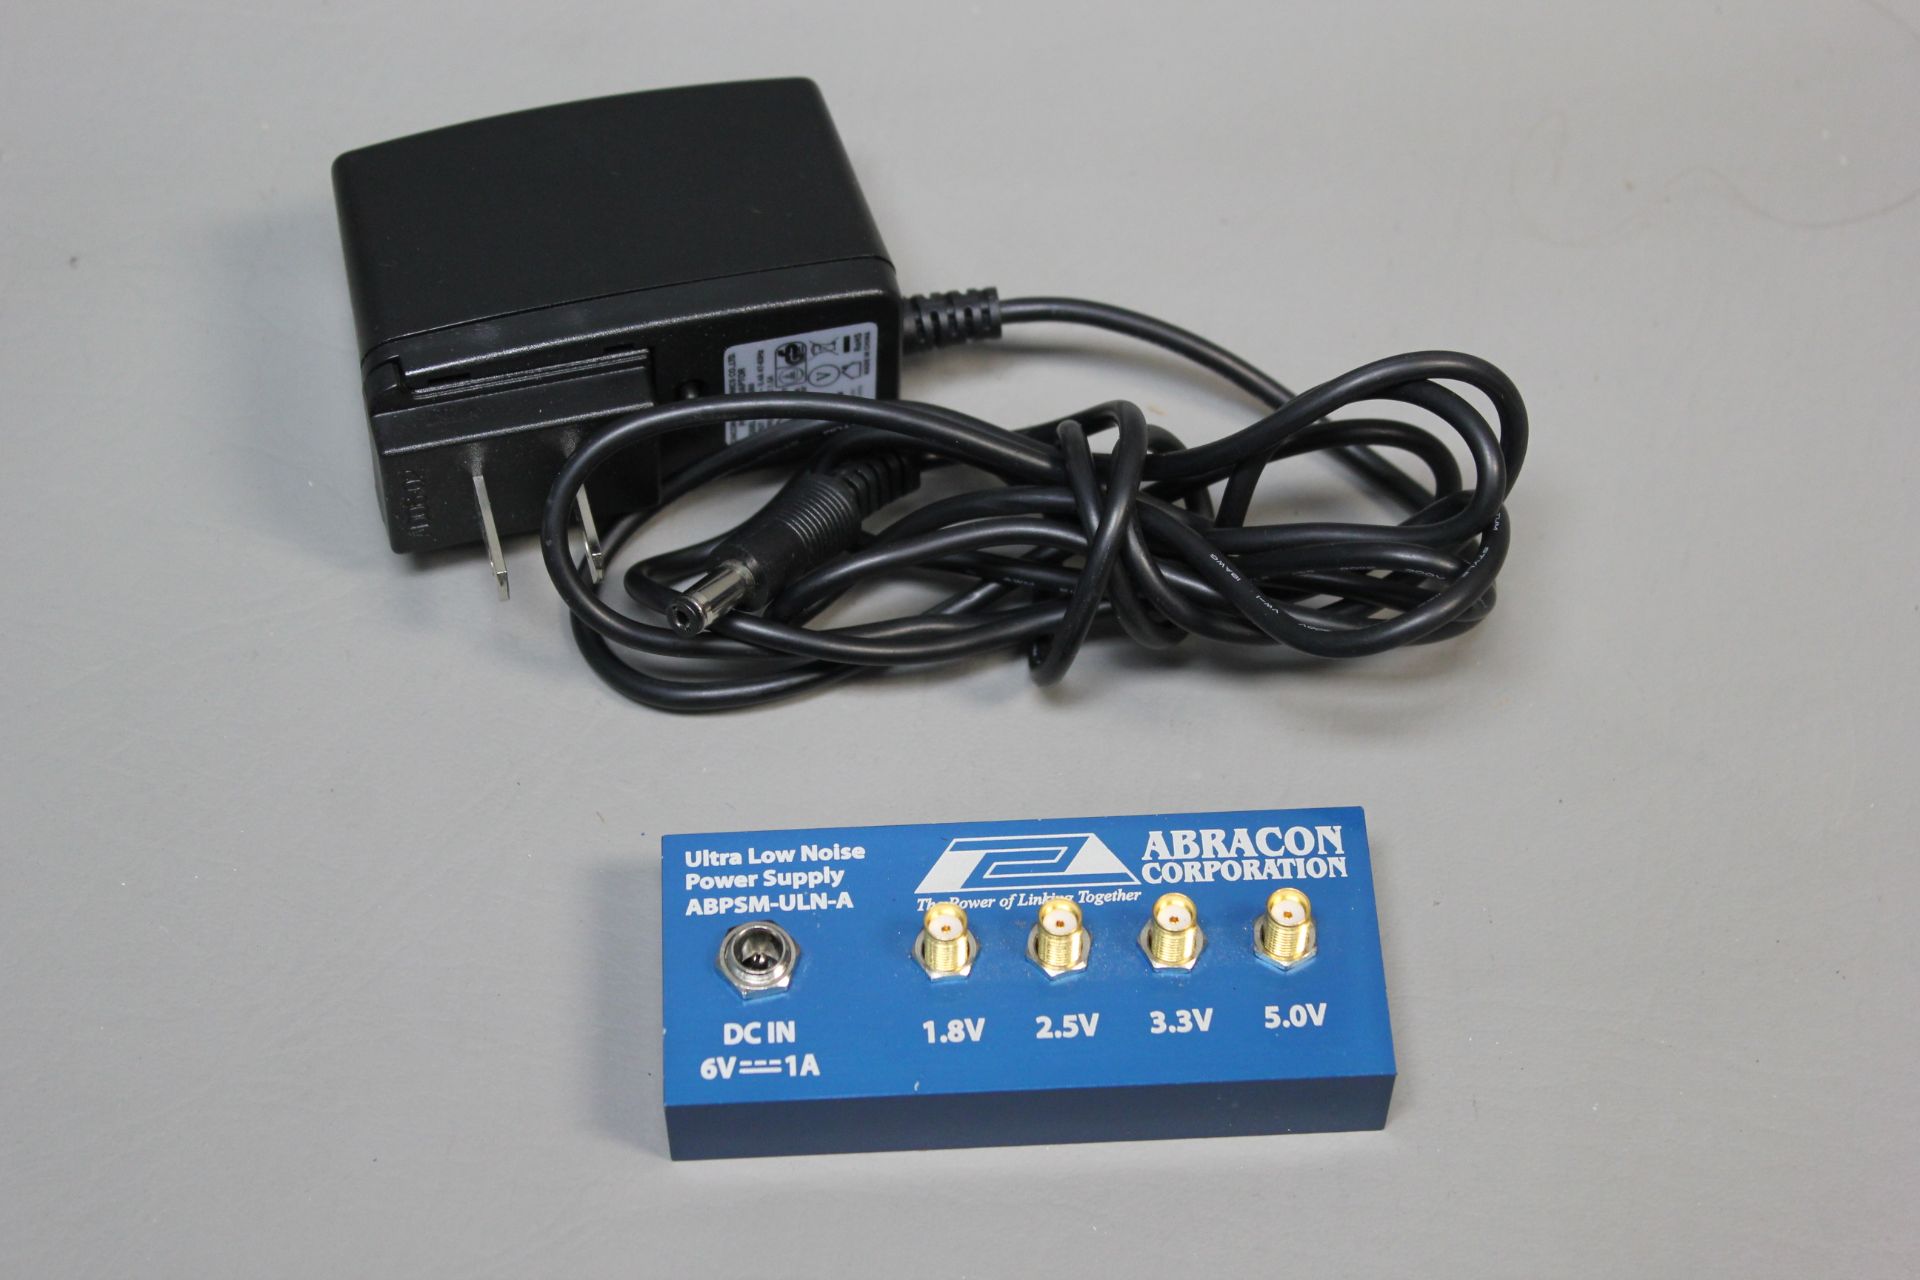 ABRACON ULTRA LOW NOISE POWER SUPPLY